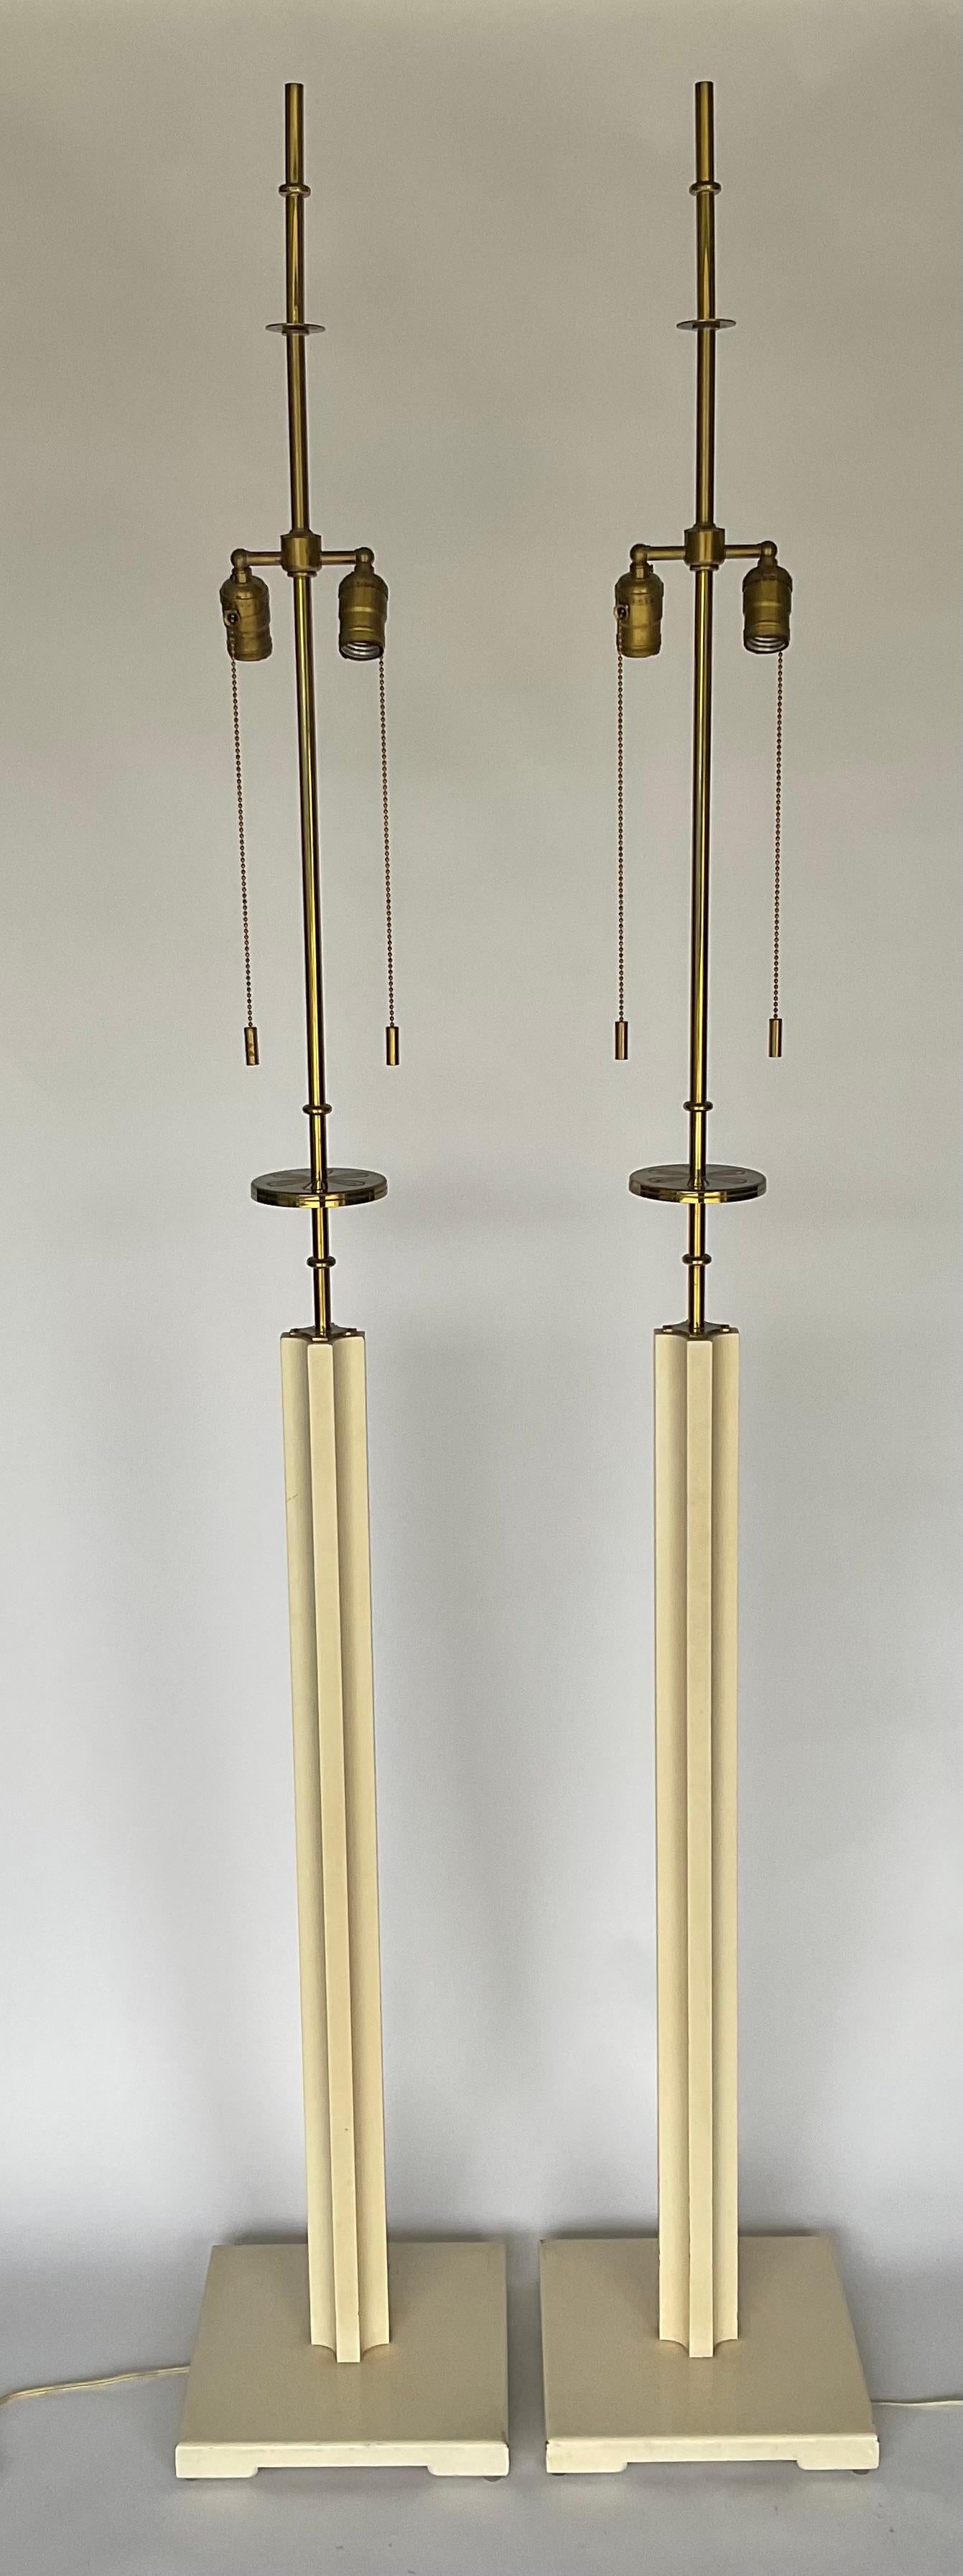 Rare PAIR Tommi Parzinger Model 6362 Floor Lamps Original finish and shades. Signed on each base with model number and Parzinger Original. One is hard to find, a pair almost impossible. 